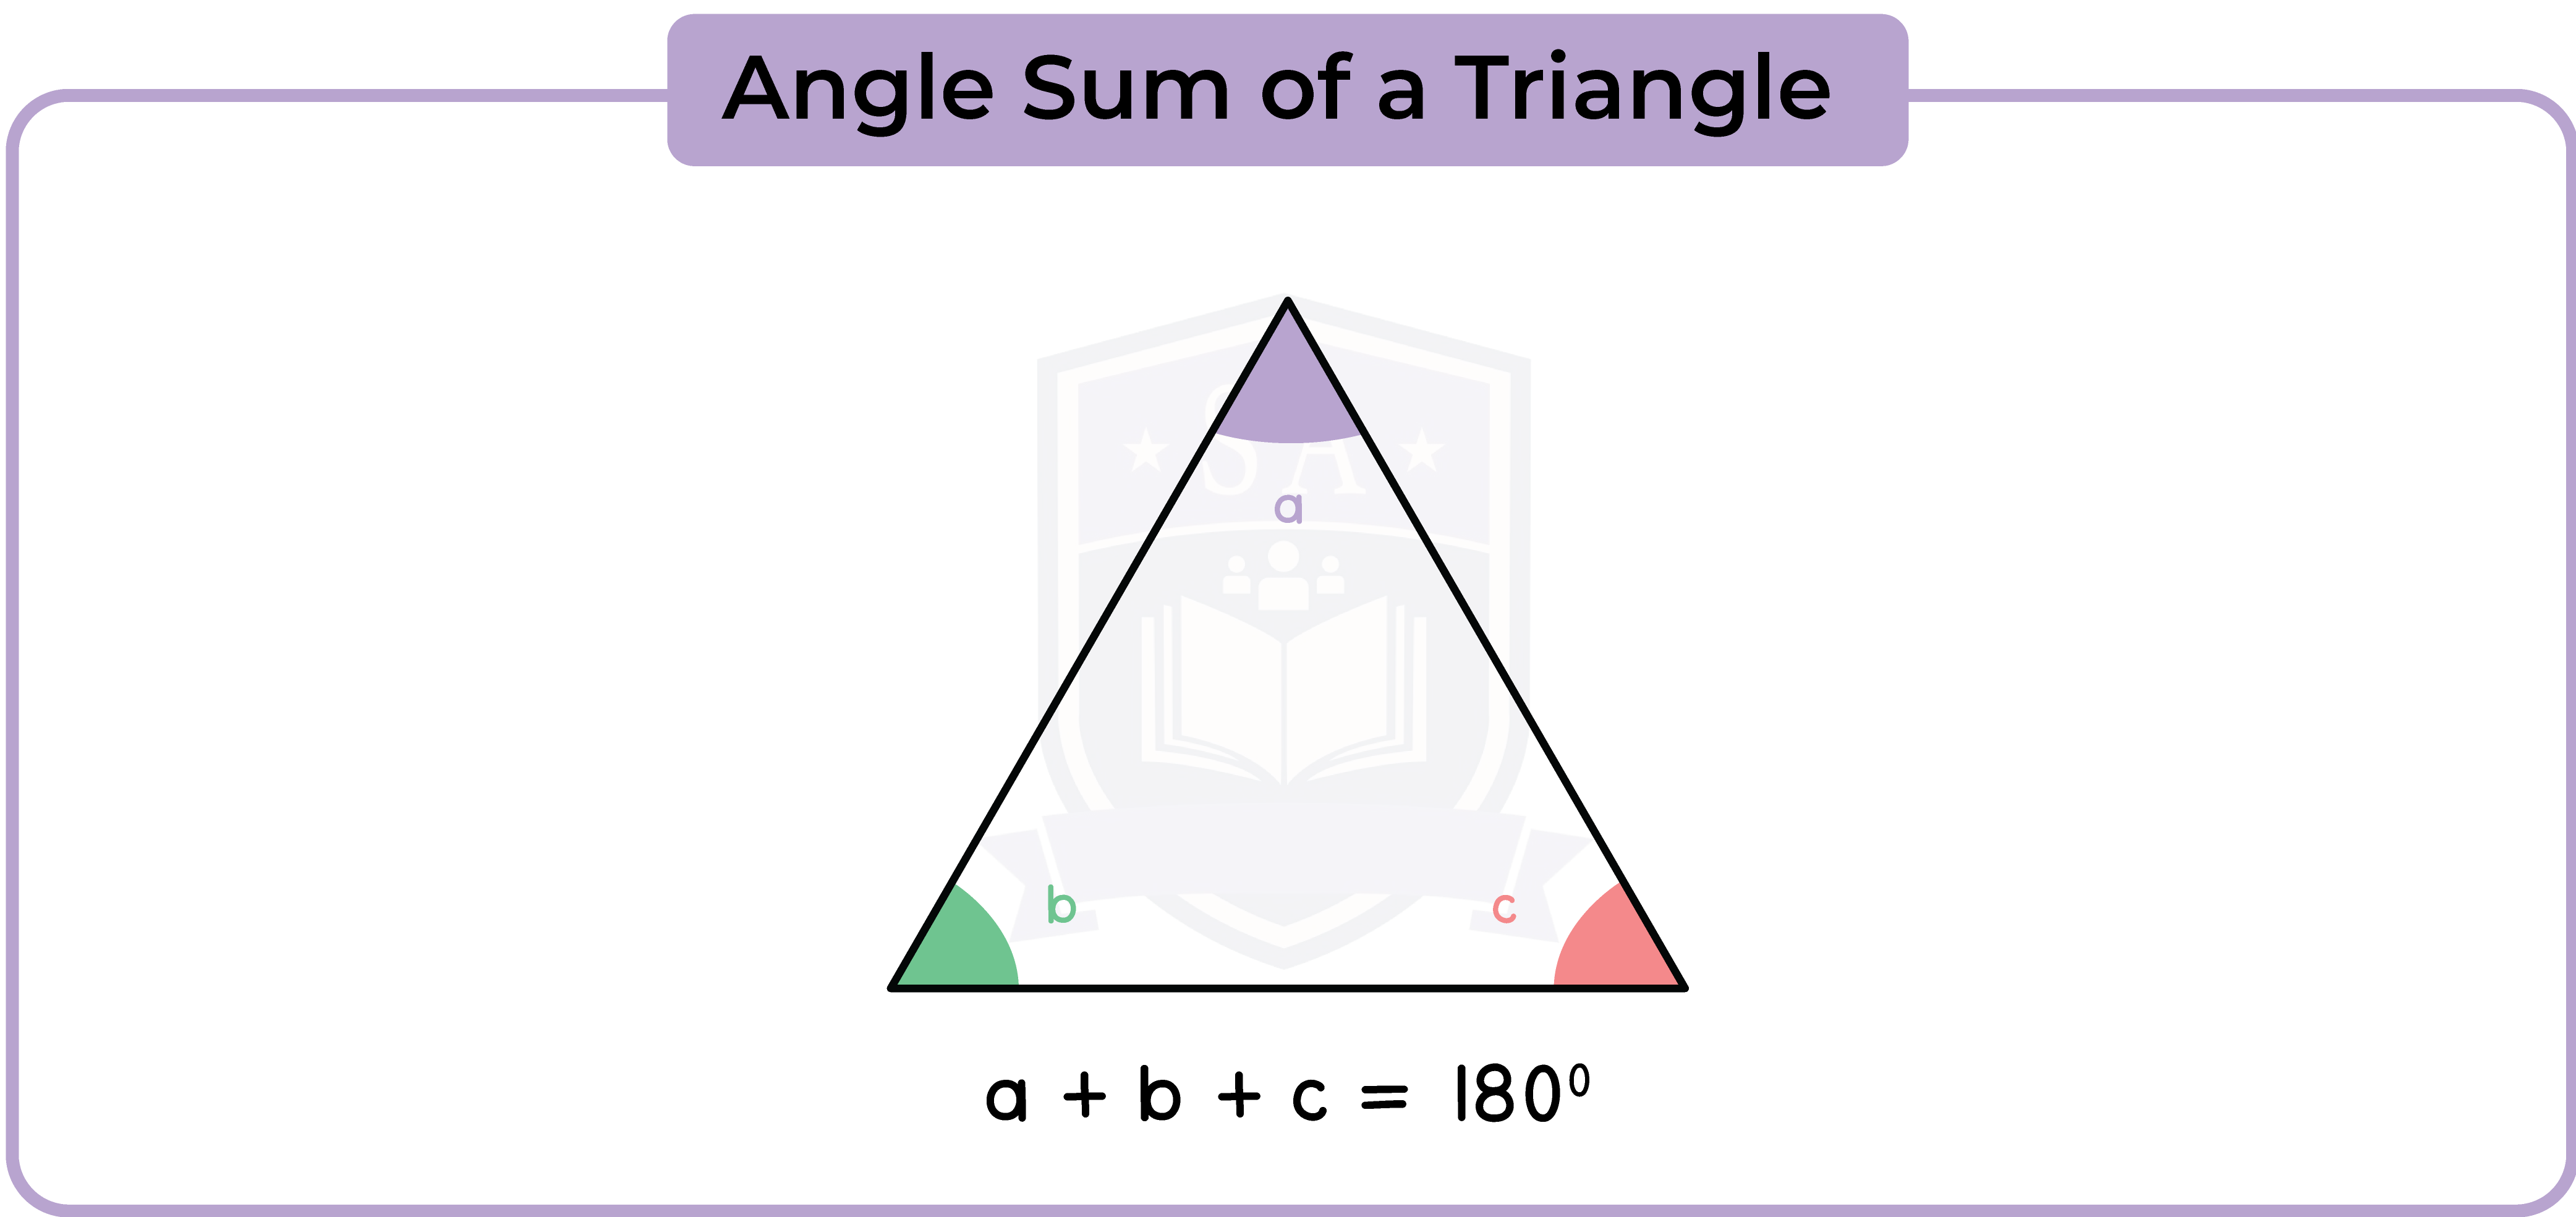 edexcel_igcse_mathematics a_topic 25_angles, lines and triangles_004_Angle Sum of a Triangle.png